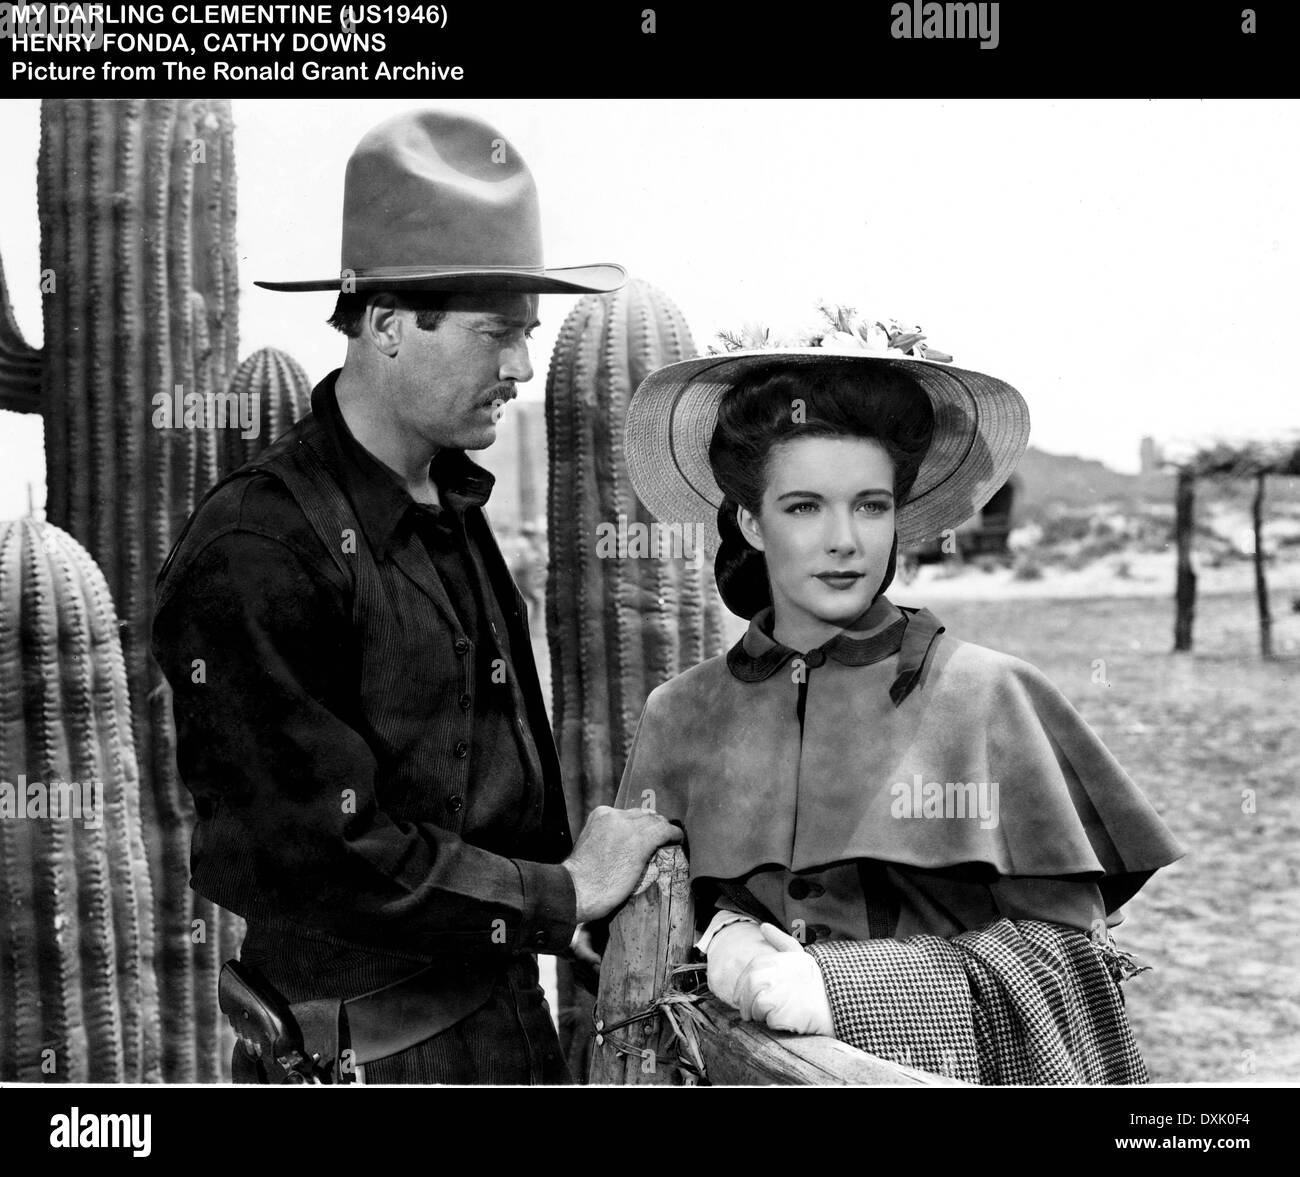 MY DARLING CLEMENTINE Banque D'Images